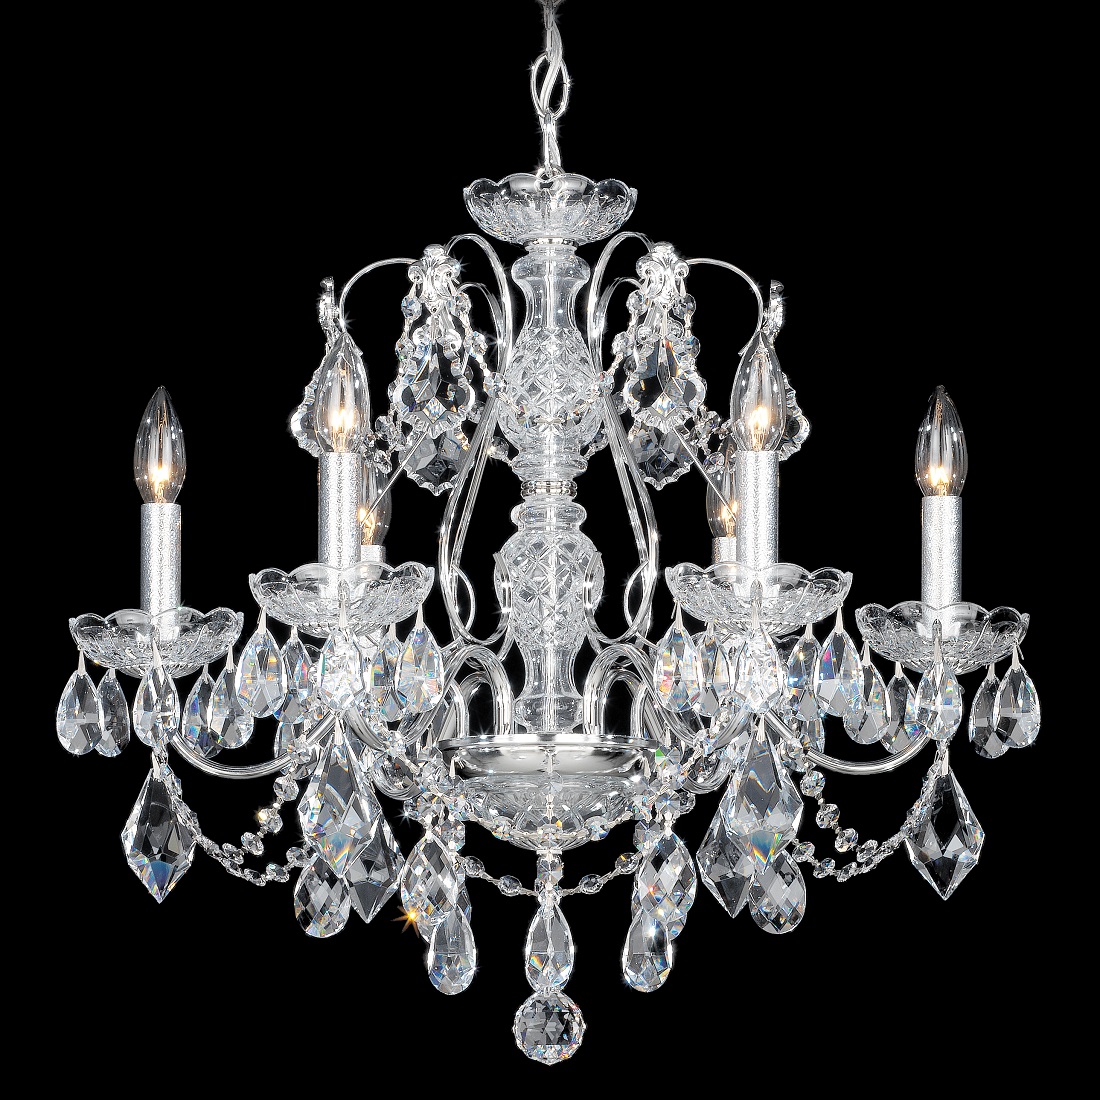 Schonbek Classic Crystal Chandelier Brooklyn,New York by Accentuations Brand